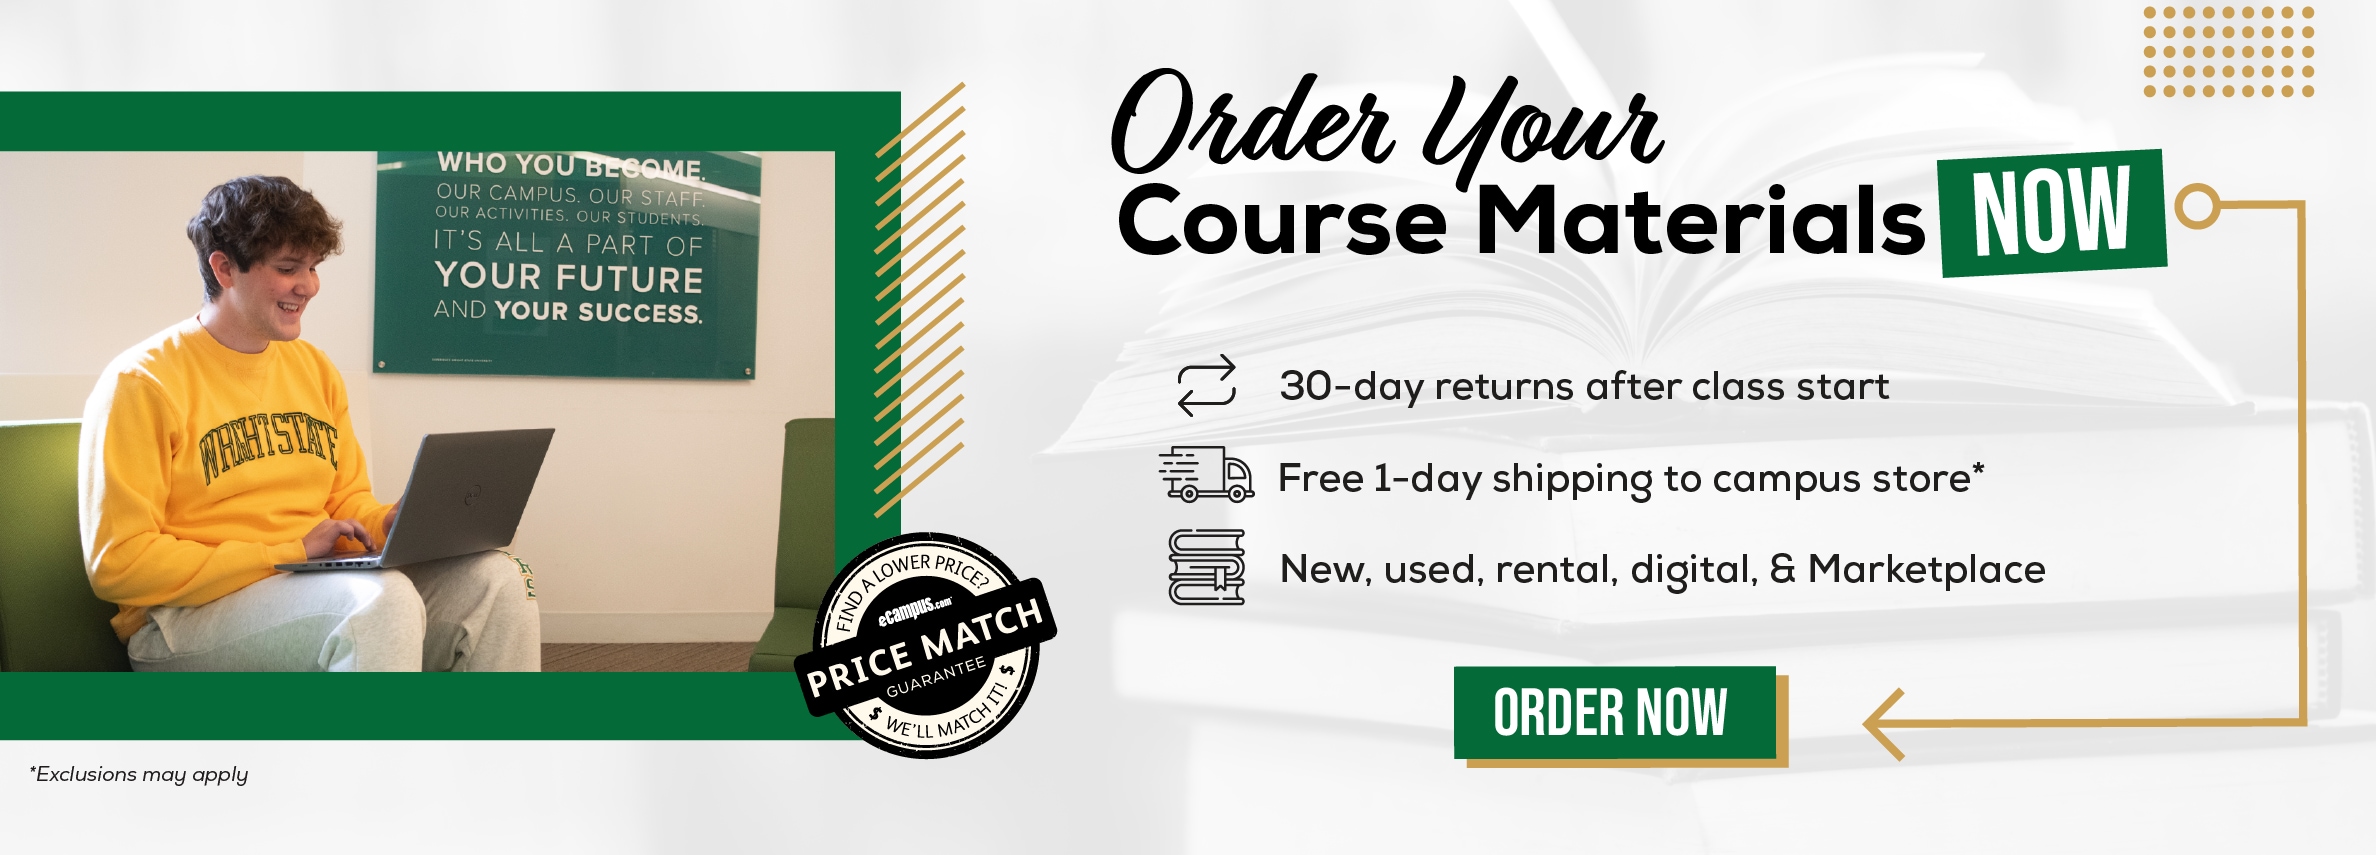 Order Your Course Materials Now. 30-day returns after class start. Free s1-day shipping to campus store*. New, used, rental, digital, & Marketplace. Order now. *Exclusions may apply.